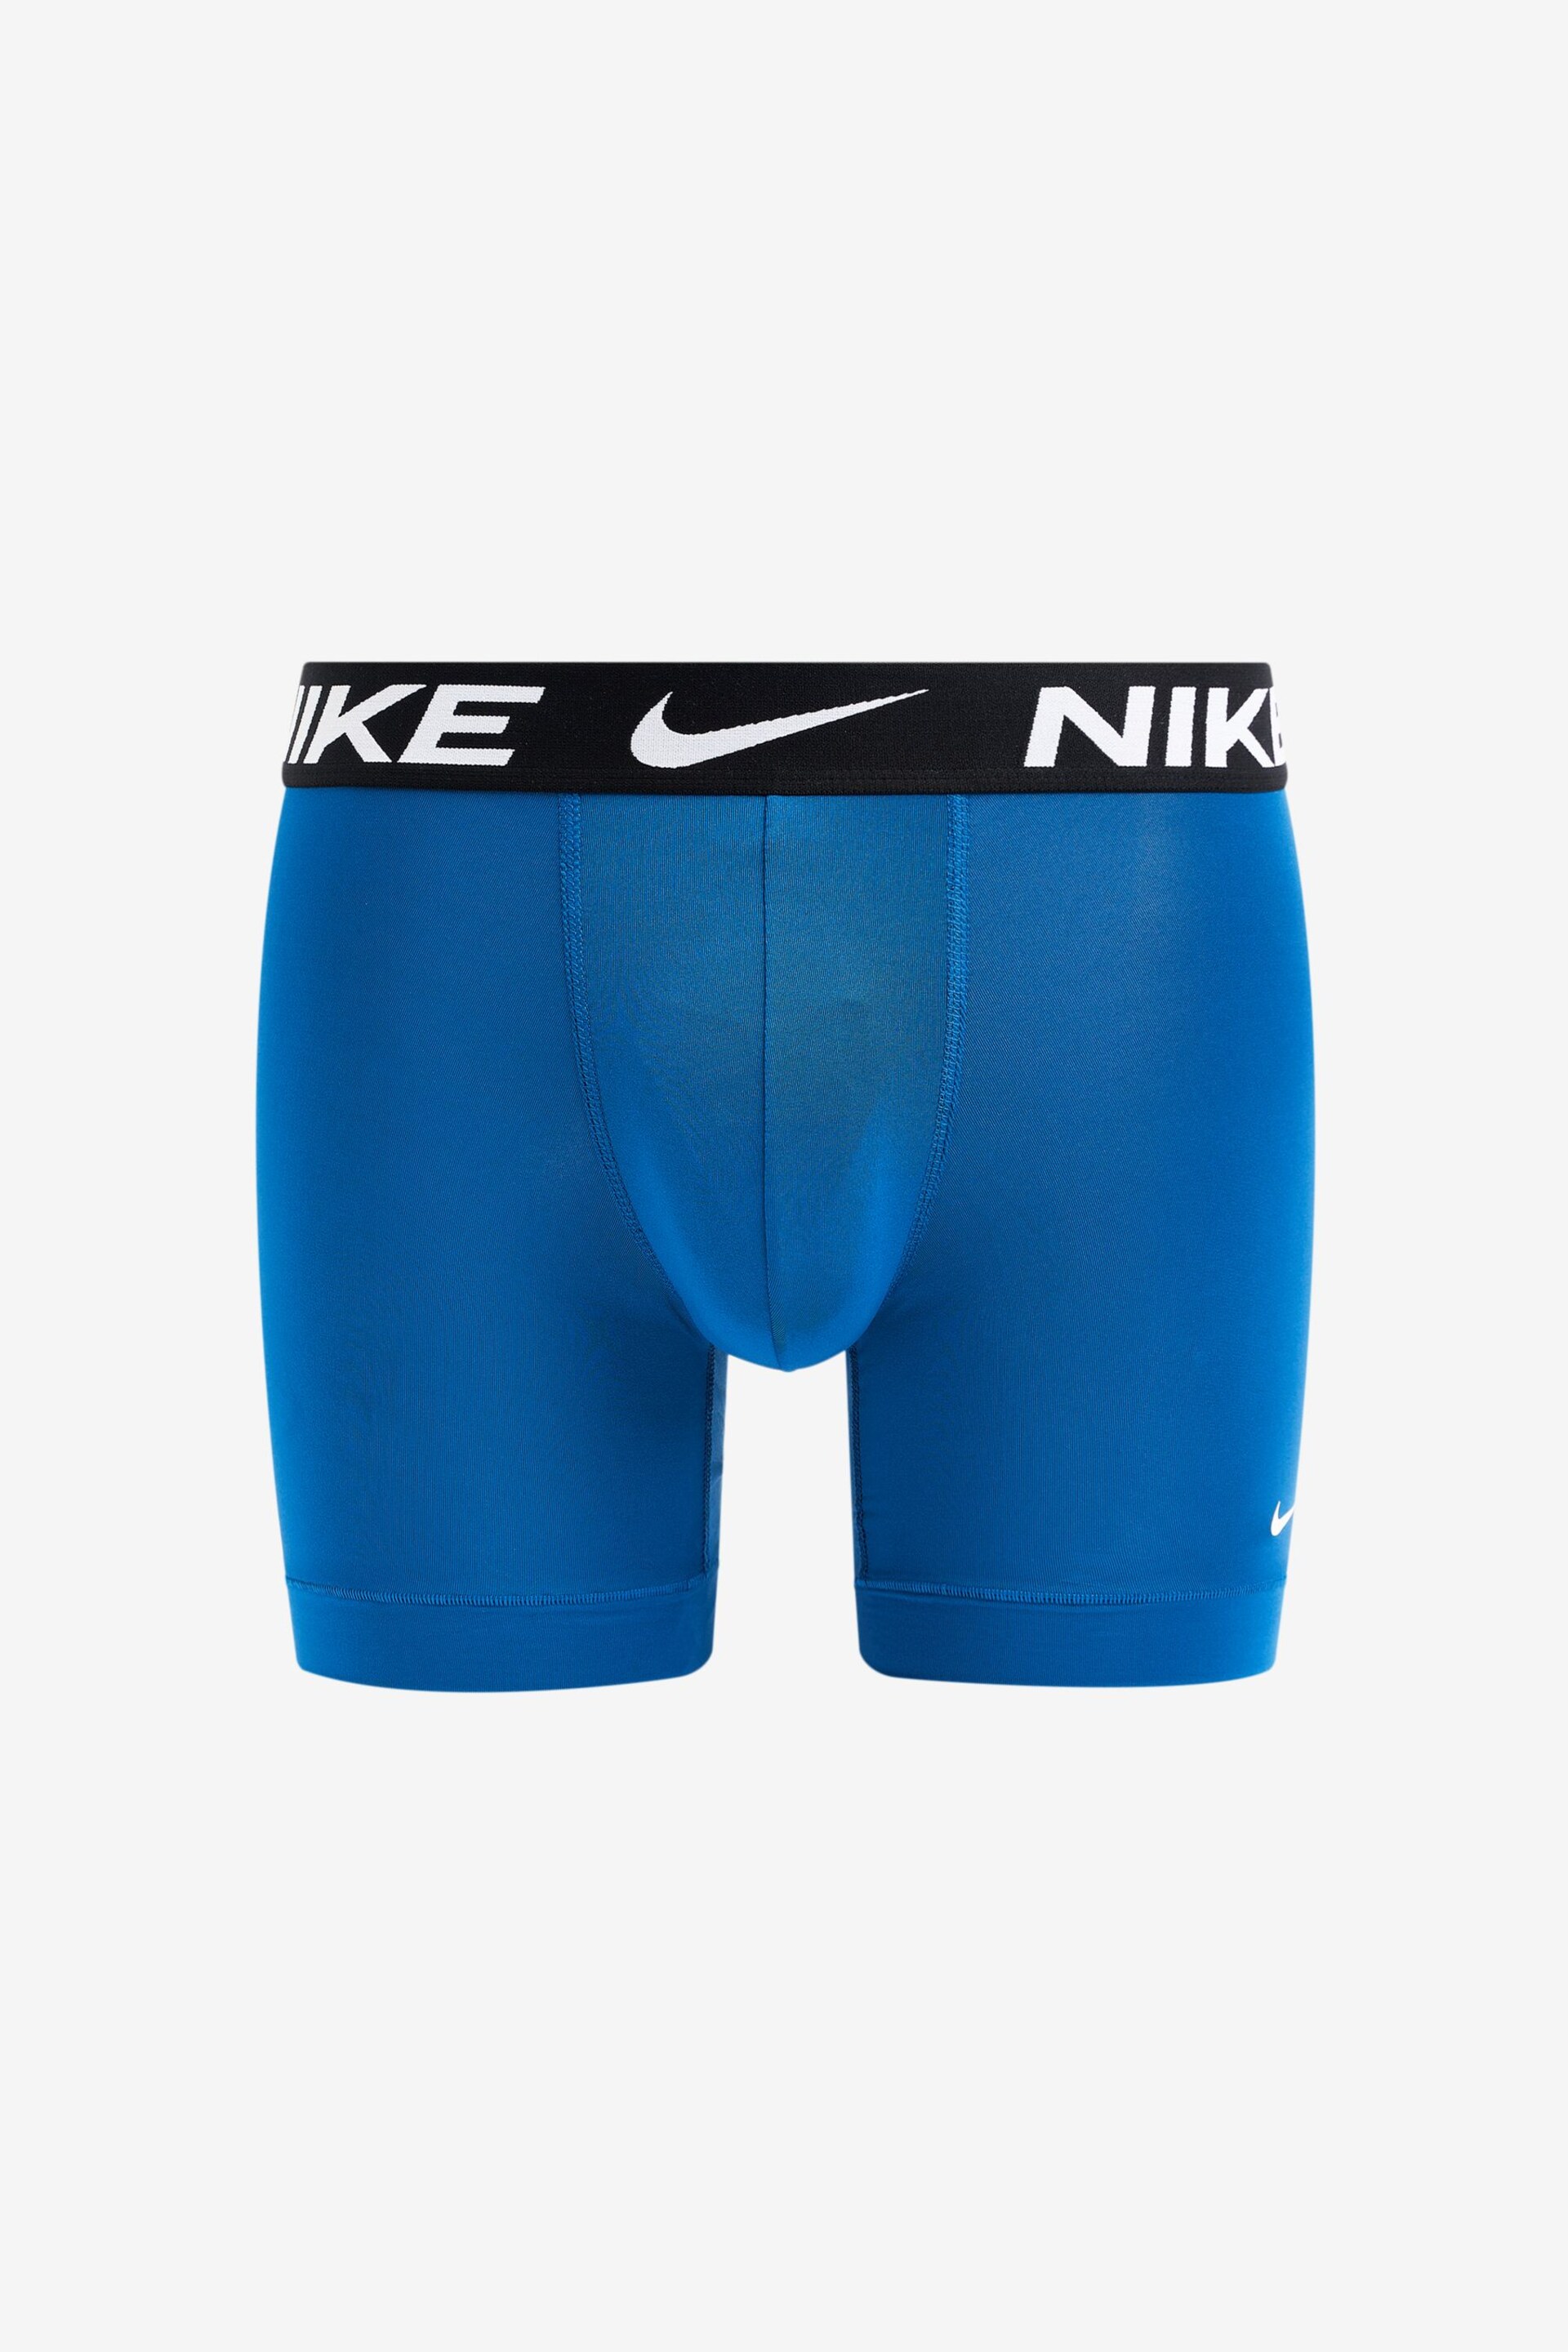 Nike Blue Boxer 3 Pack - Image 3 of 4